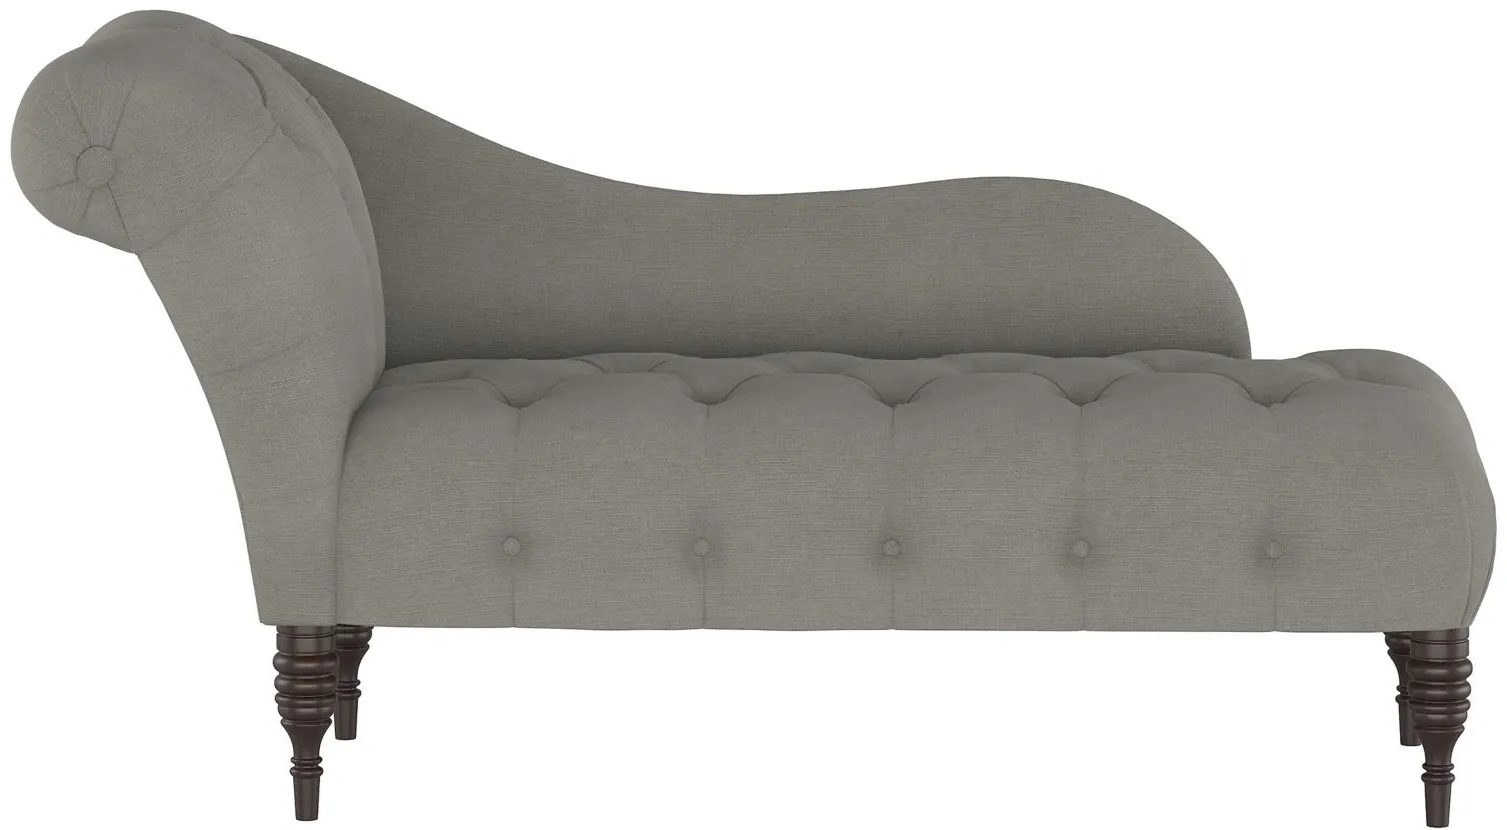 Opulence Chaise Lounge in Linen Grey by Skyline